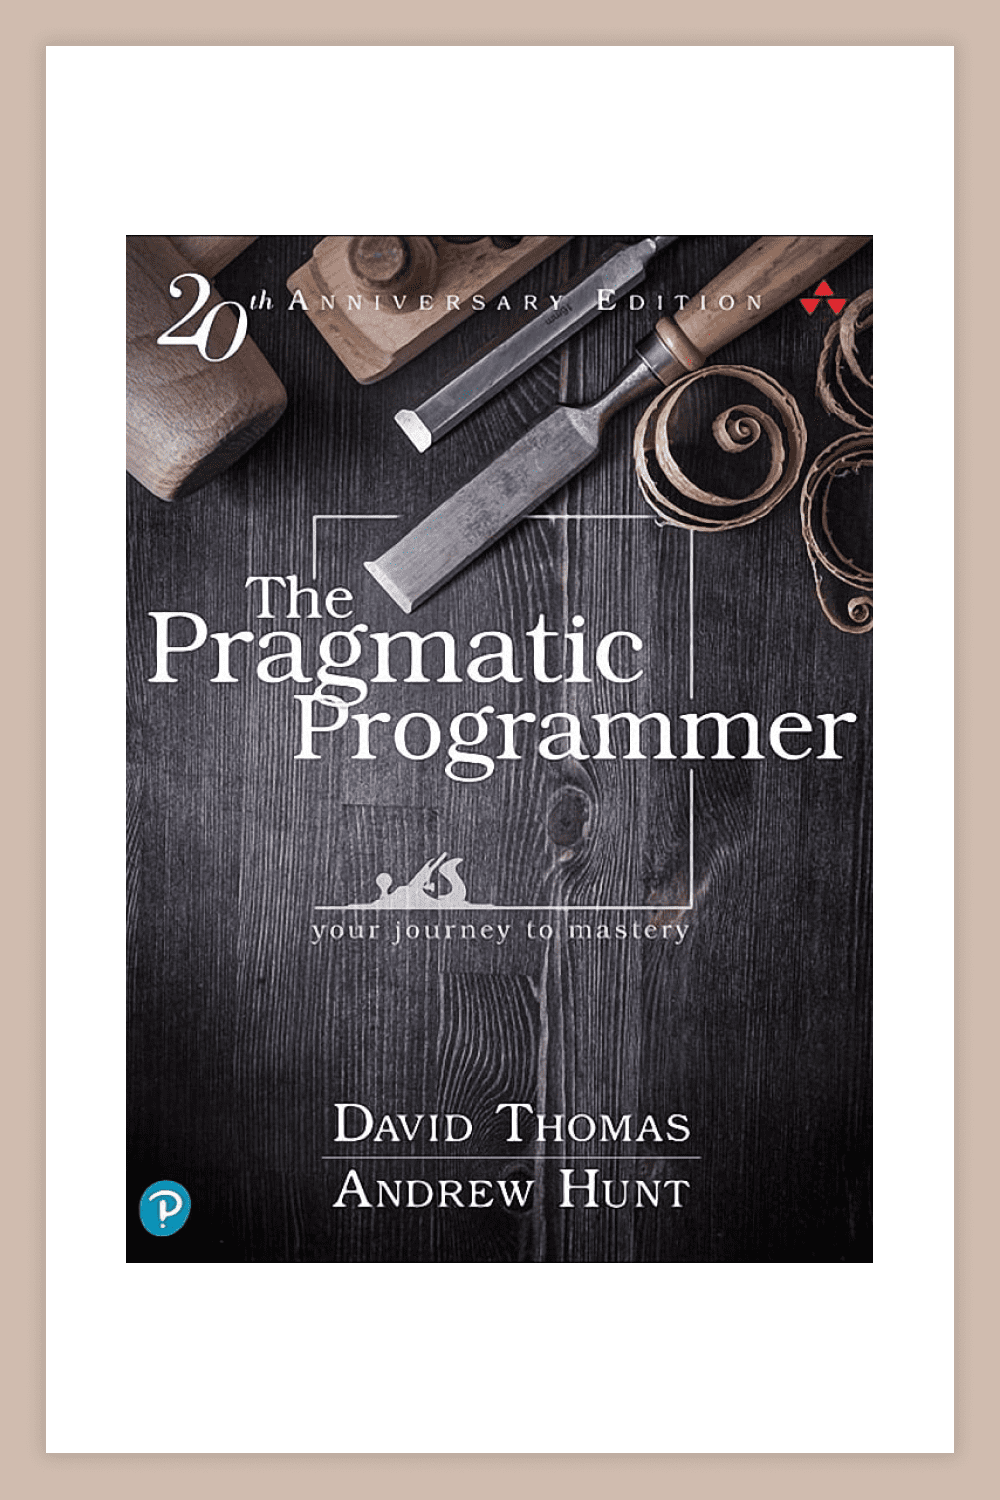 Cover of the book Pragmatic Programmer, The: Your journey to mastery.